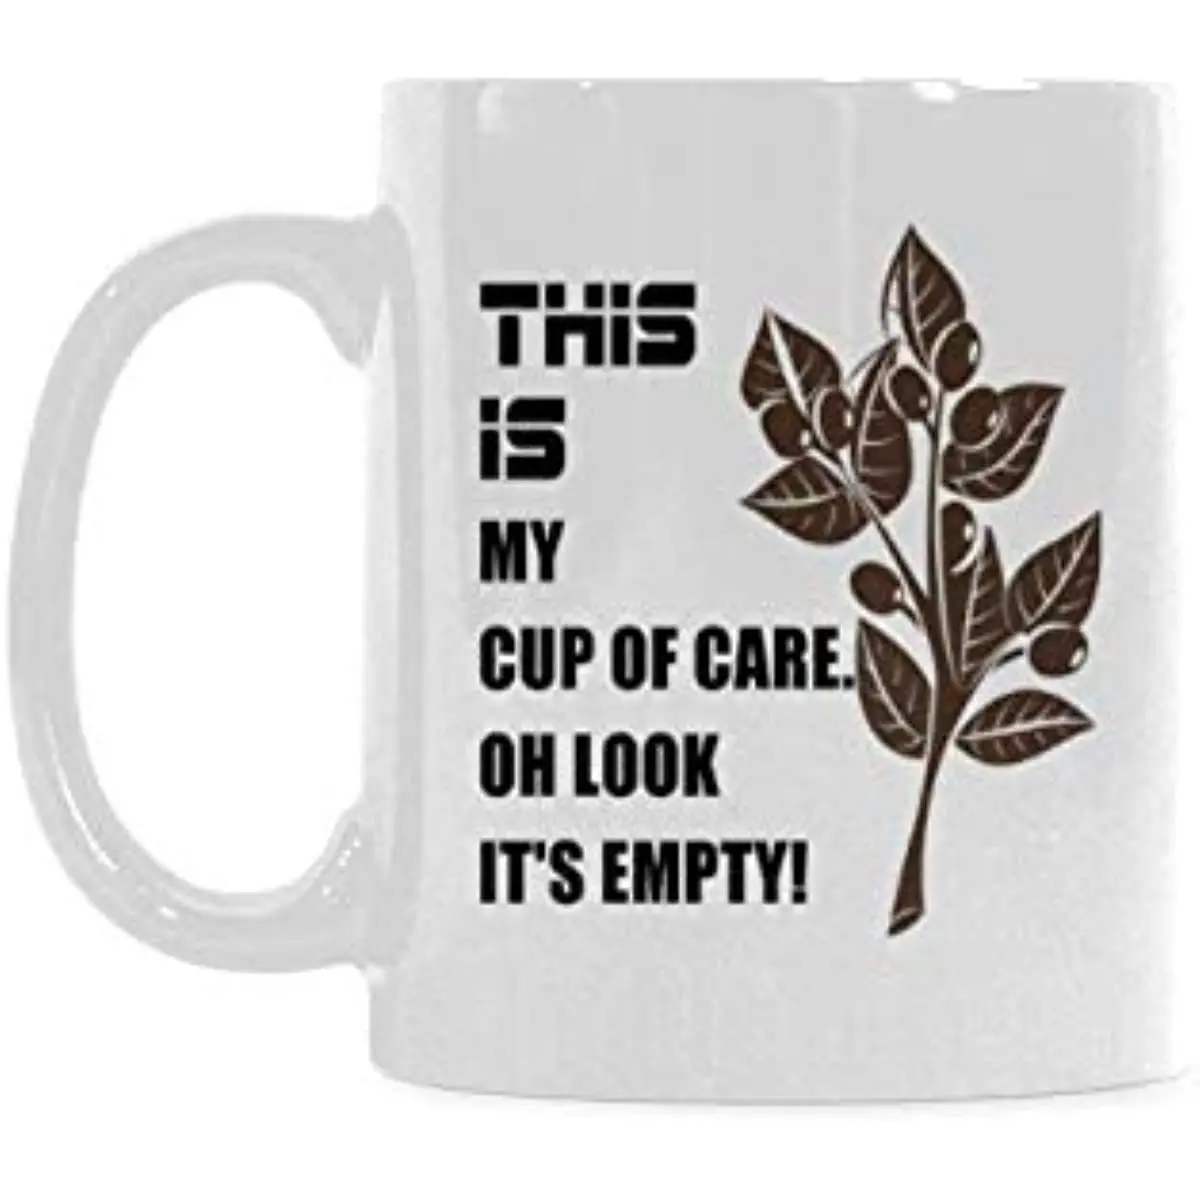 

Funny This Is My Cup Of Care. Oh Look It's Empty! 11 Oz White Ceramic Coffee Mug Tea Cups For Funny Gift Mug